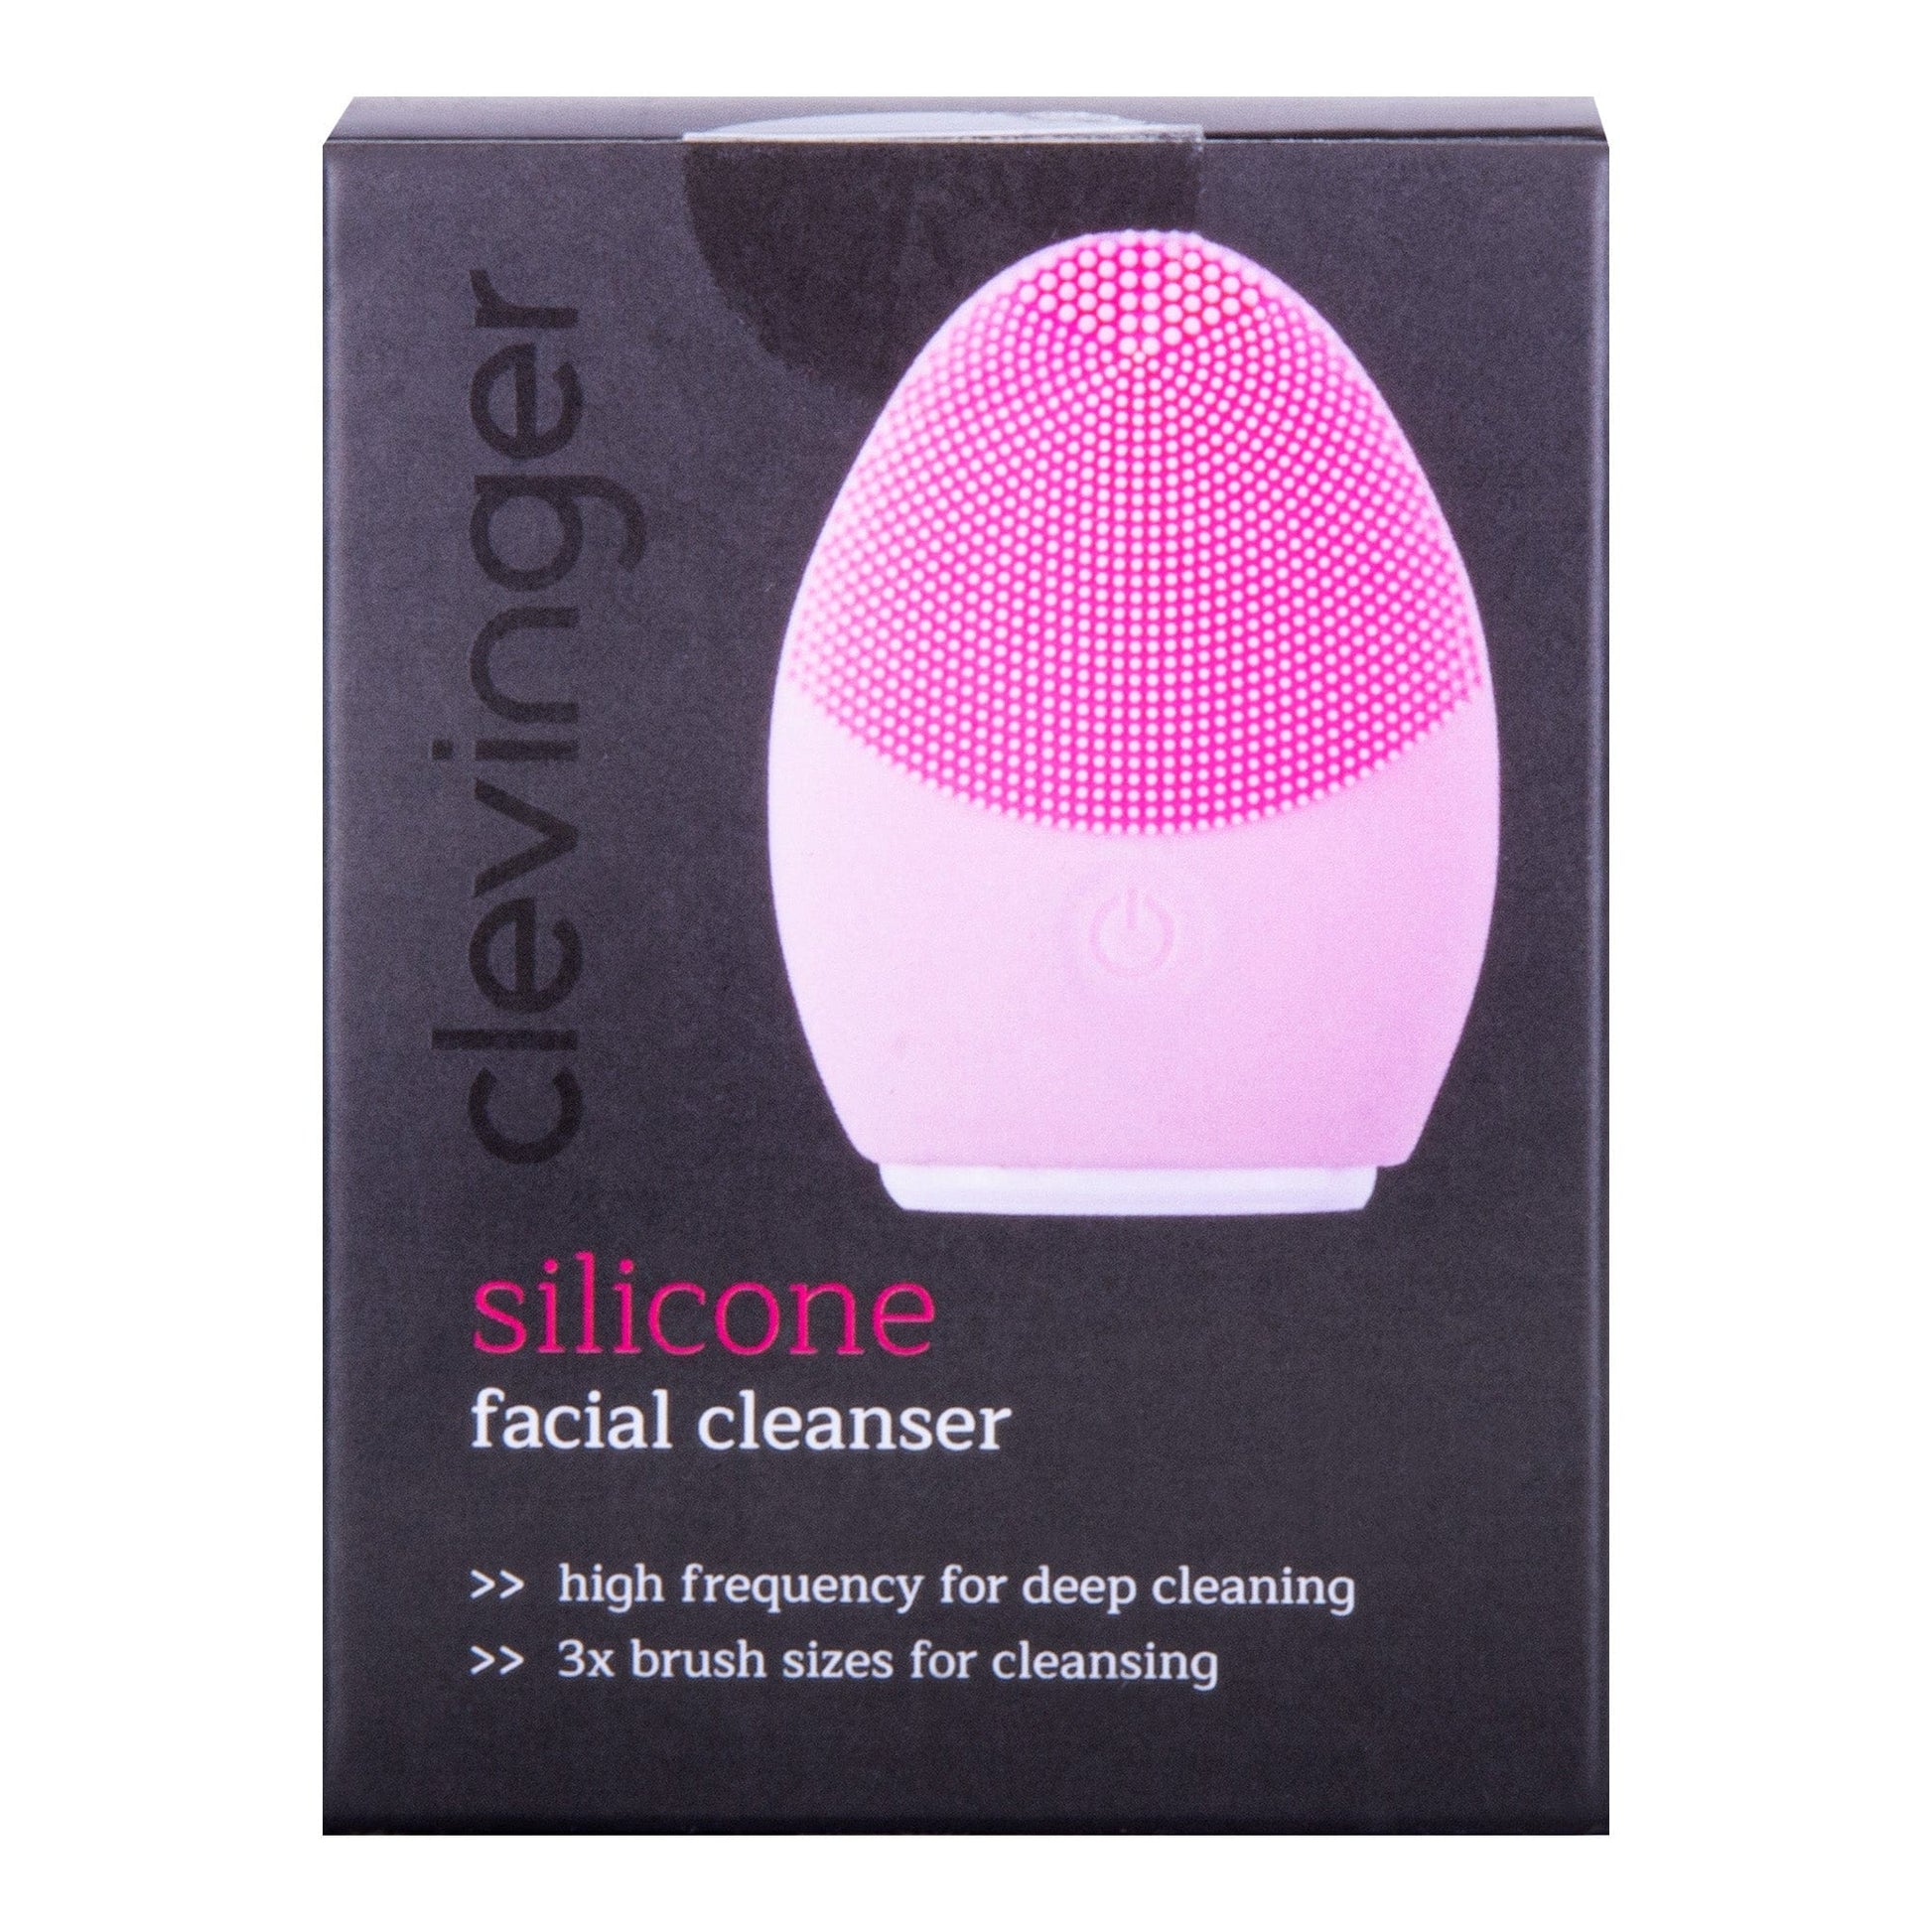 Clevinger Health & Beauty Clevinger Silicone Facial Cleanser